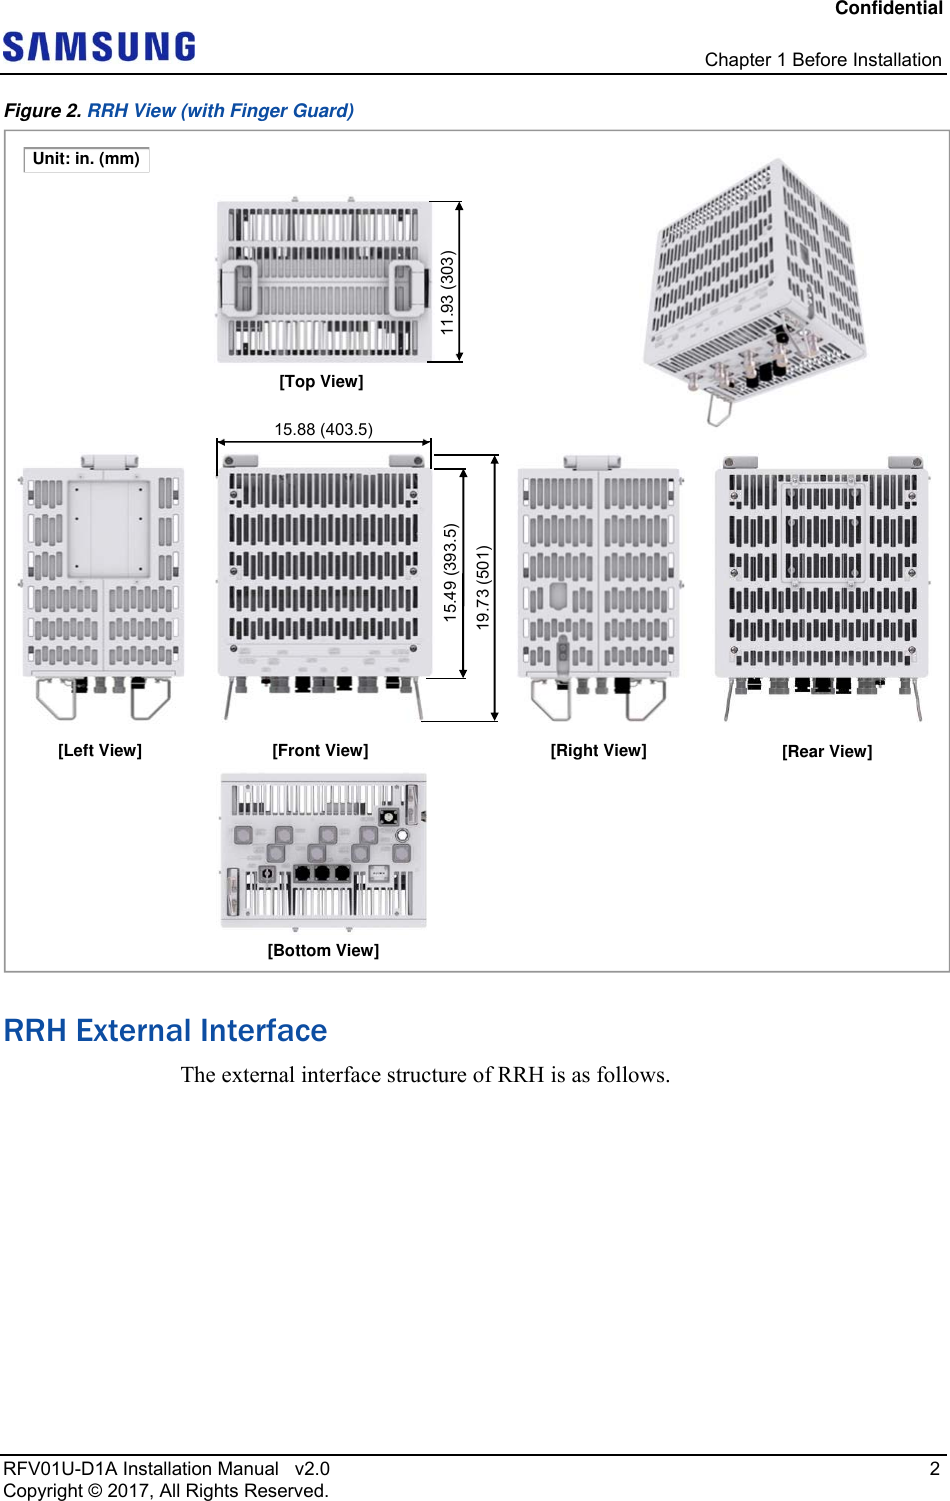 Confidential   Chapter 1 Before Installation RFV01U-D1A Installation Manual   v2.0   2 Copyright © 2017, All Rights Reserved. Figure 2. RRH View (with Finger Guard)  RRH External Interface The external interface structure of RRH is as follows. [Bottom View]15.49 (393.5) [Front View][Top View] [Left View]  [Right View] [Rear View] 19.73 (501) 11.93 (303) 15.88 (403.5) Unit: in. (mm) 